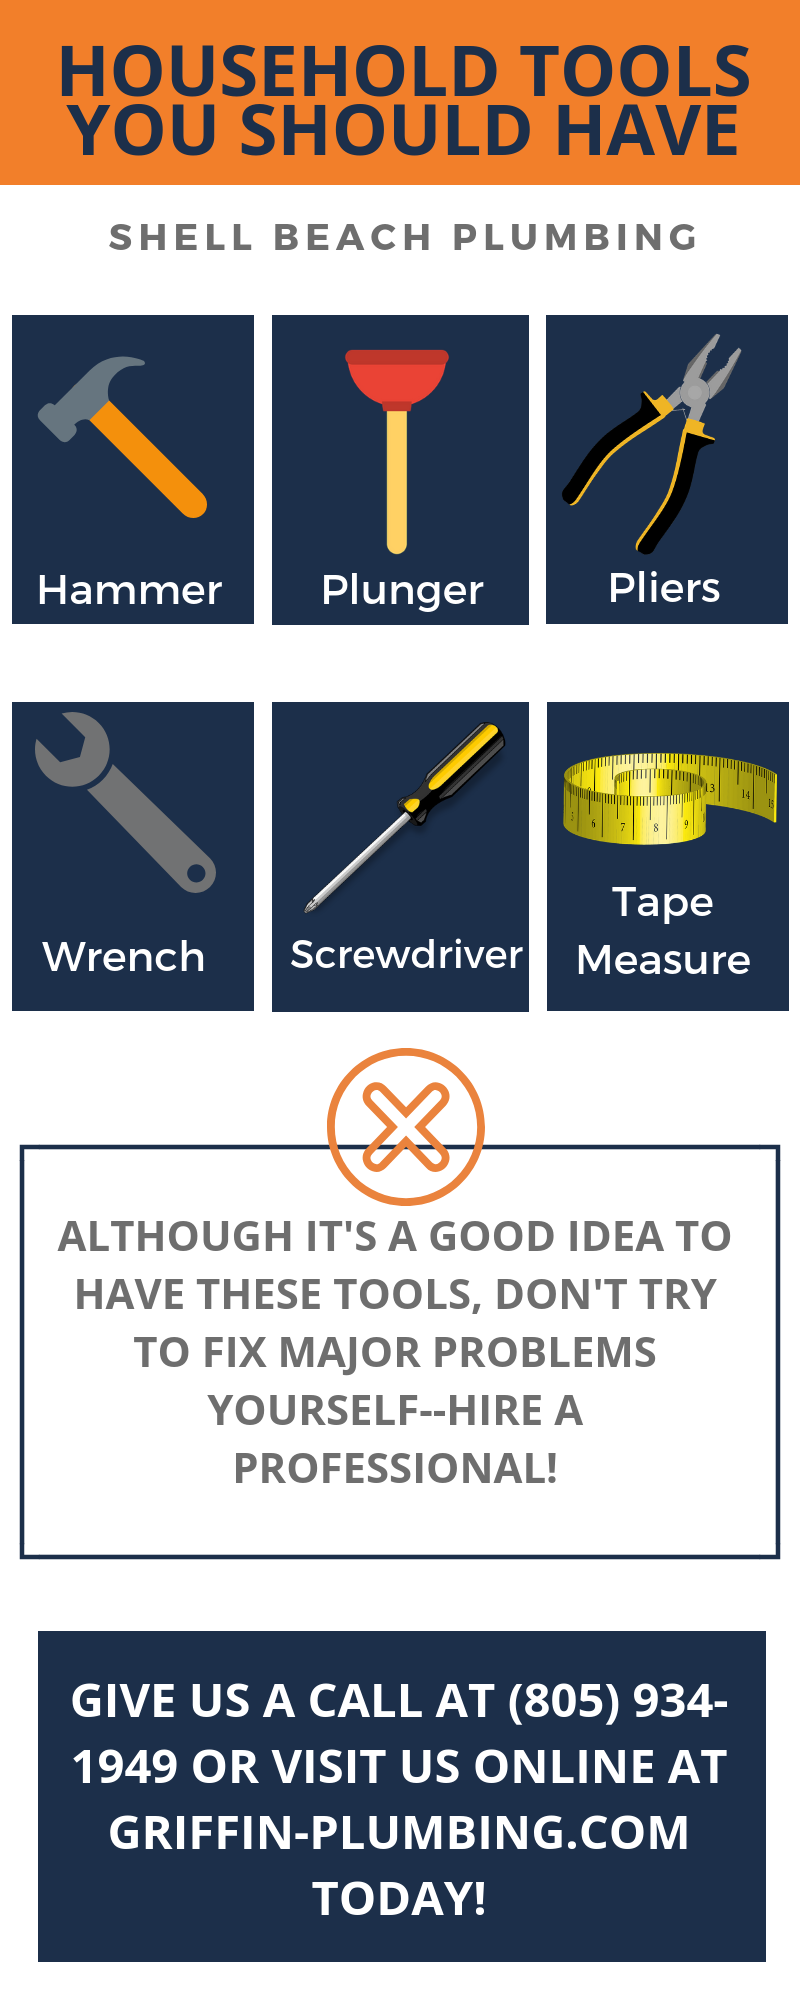 Shell Beach Plumbing: Household Tools You Should Have